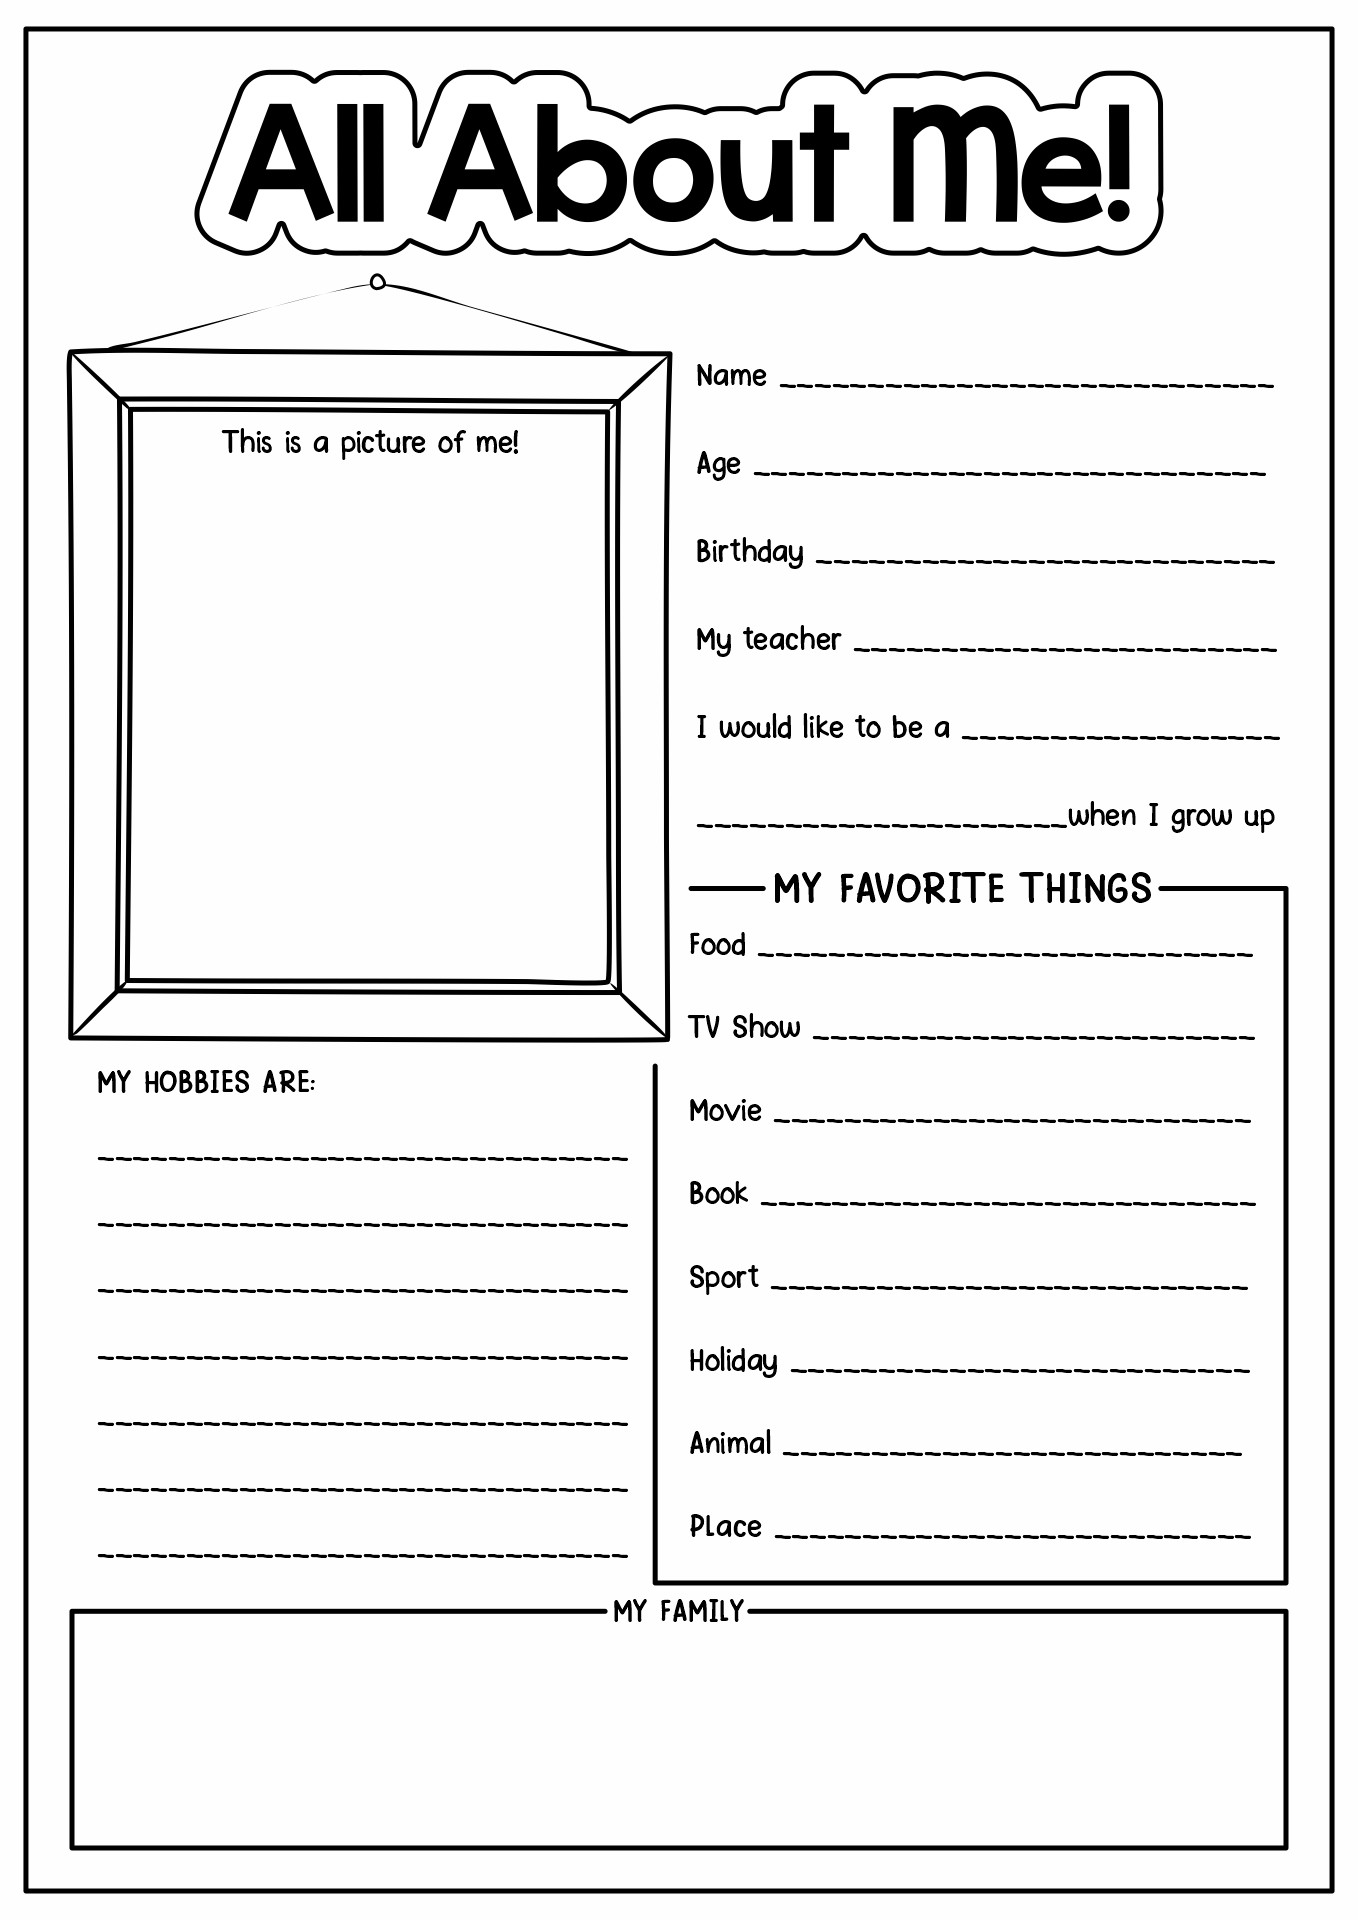 Free Back to School All About Me Activity